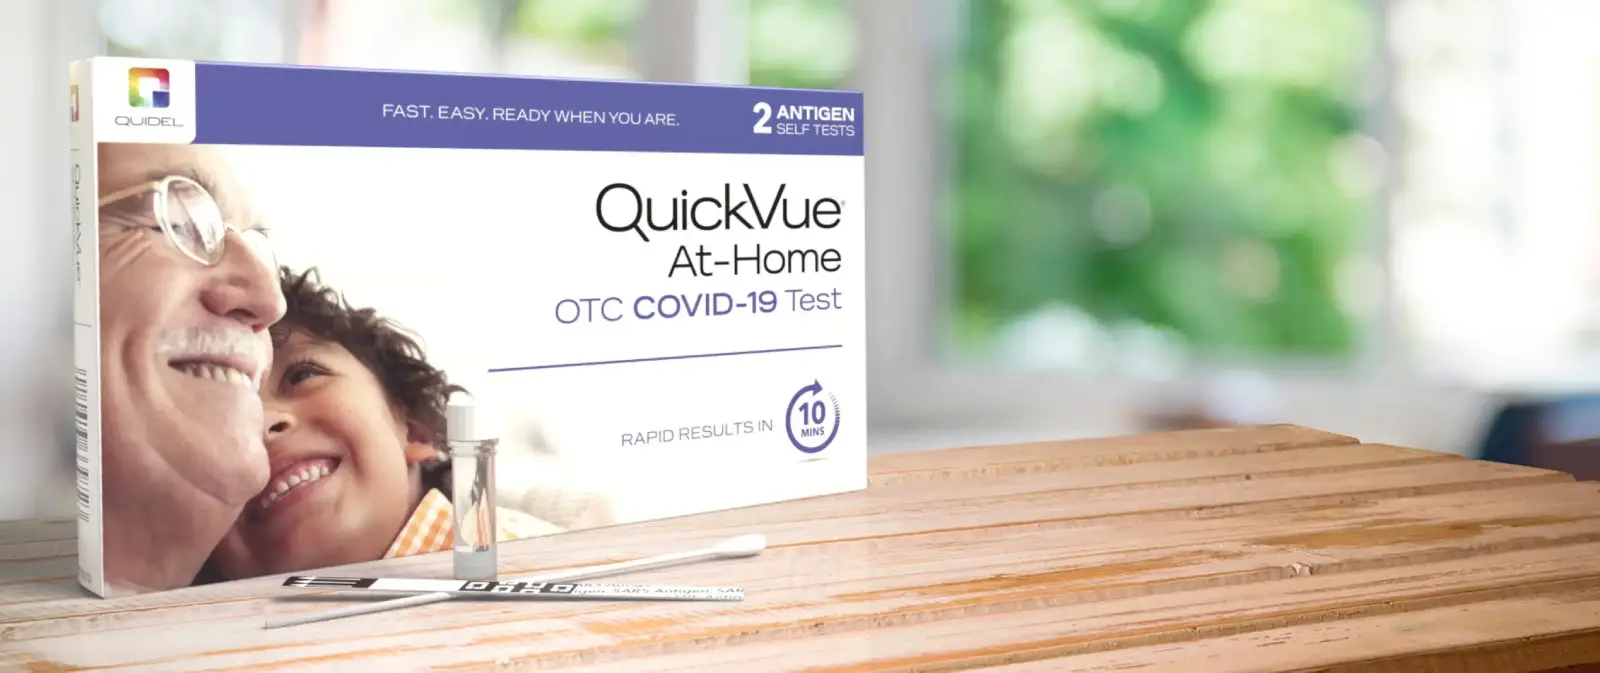 QuickVue At-Home OTC COVID-19 Test in packaging. Rapid results in 10 minutes.